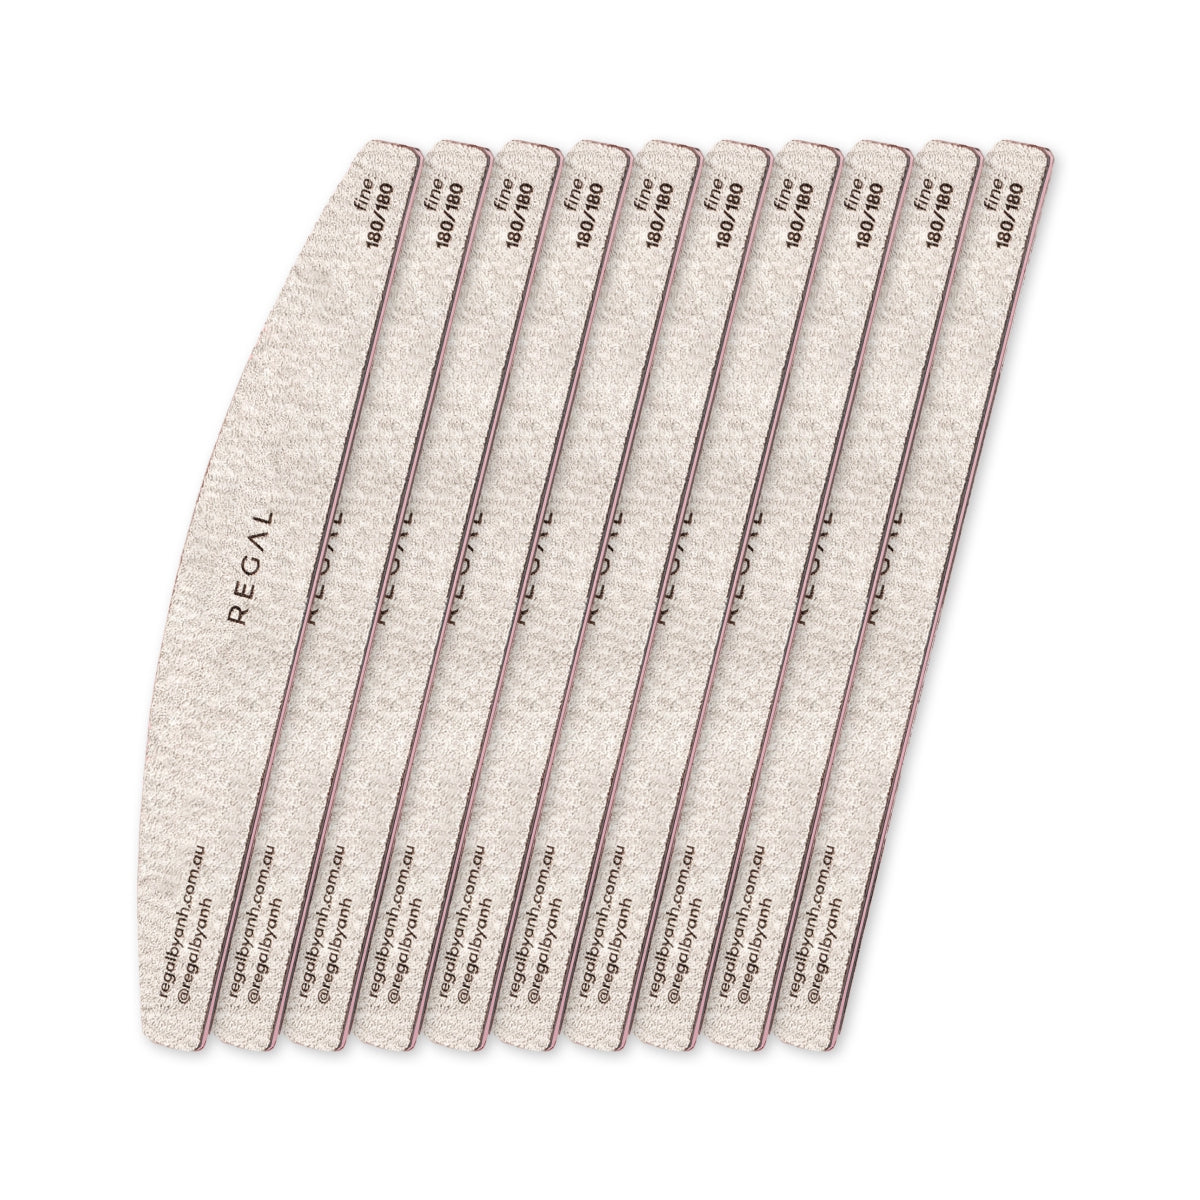 Regal by Anh Harbour Bridge Fine 180/180 Nail File (10 Pack)